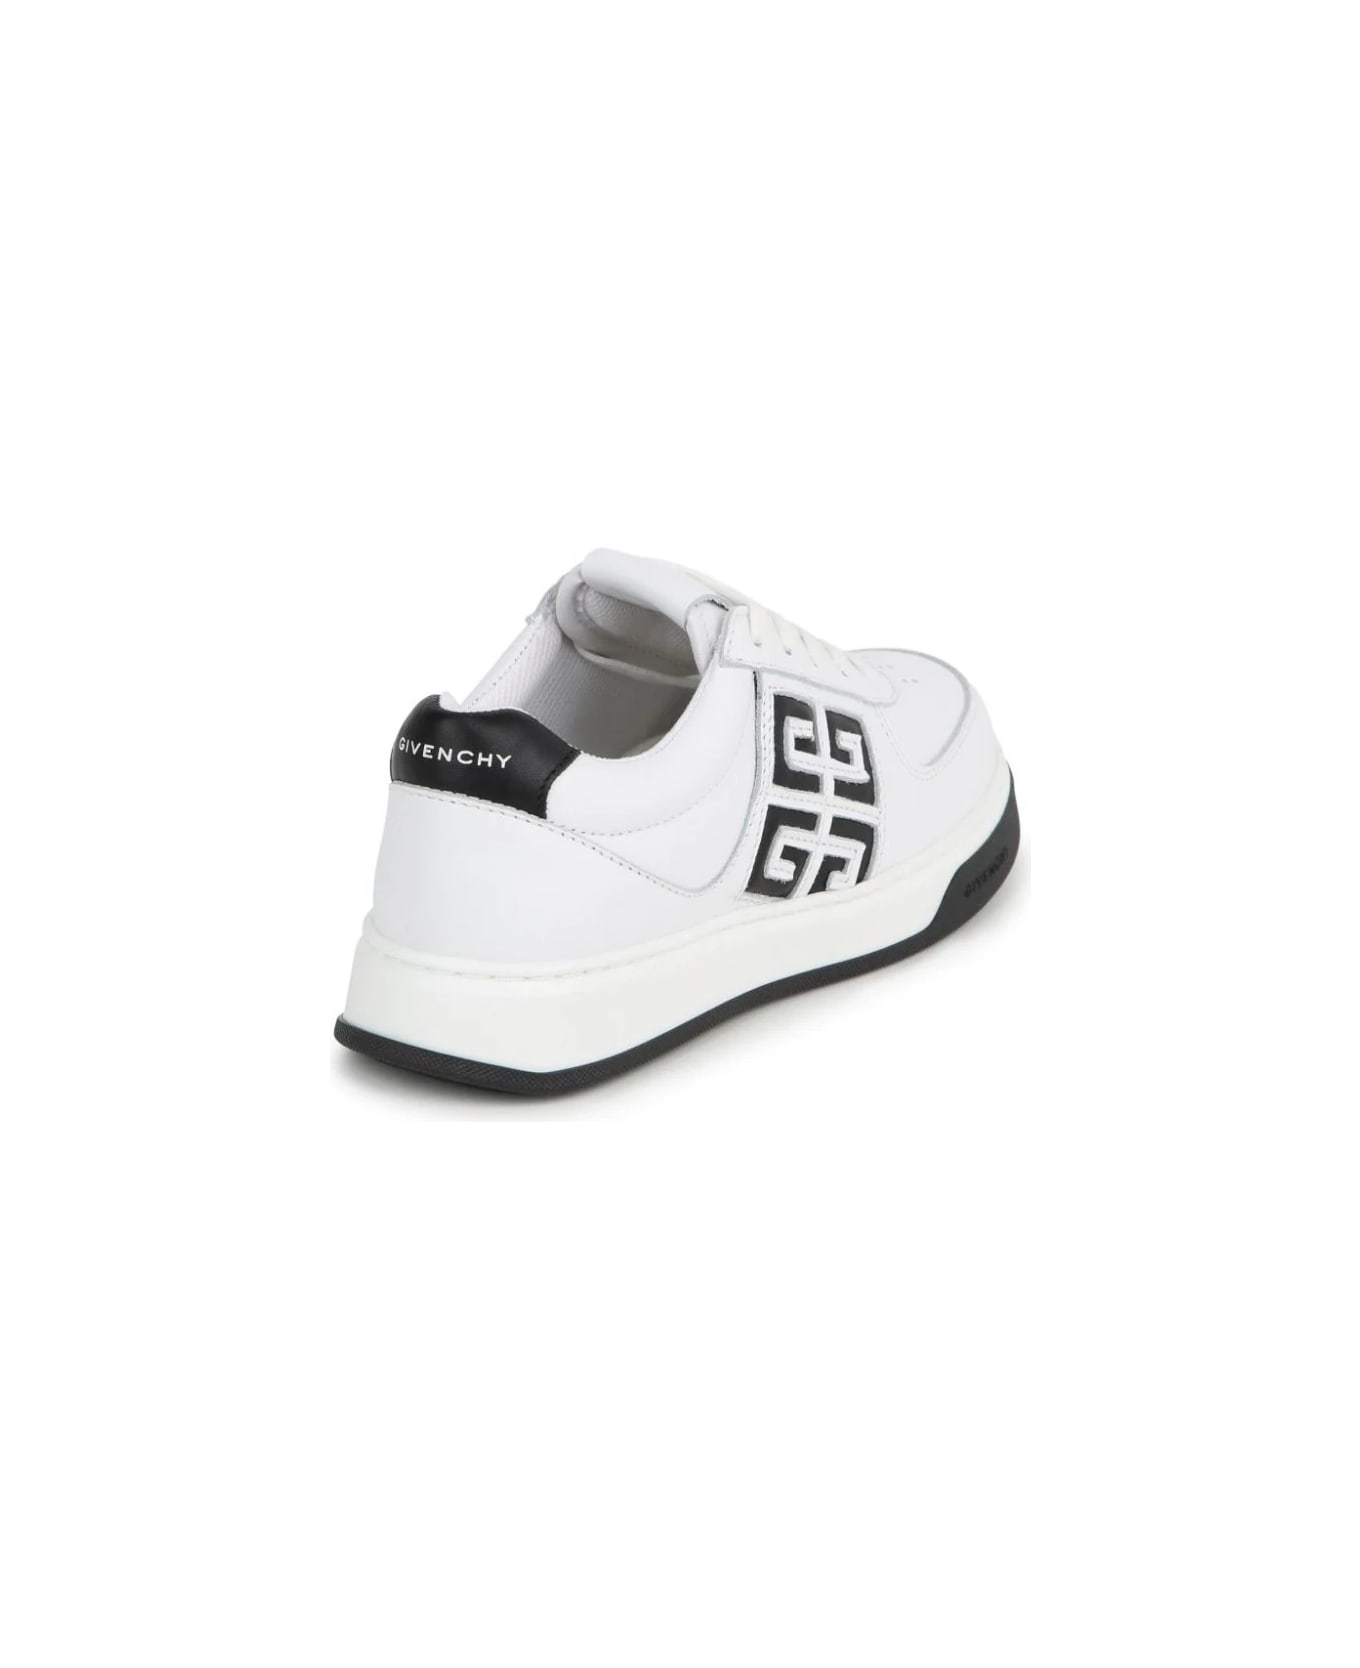 Givenchy G4 Sneakers In White And Black Leather - White